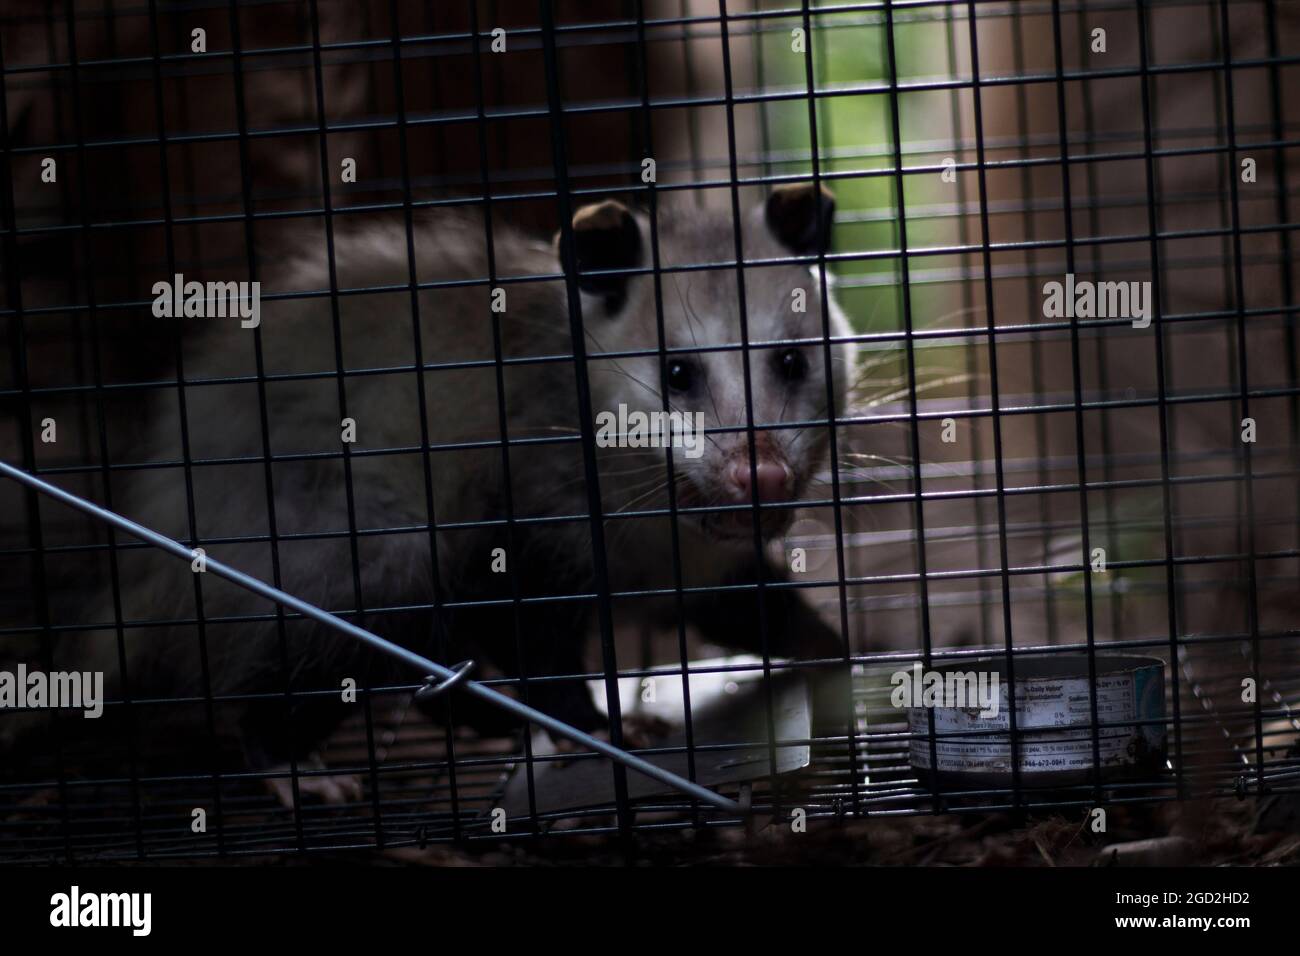 https://c8.alamy.com/comp/2GD2HD2/opossum-caught-in-cage-live-trap-pest-control-wild-animal-trapping-and-relocating-2GD2HD2.jpg